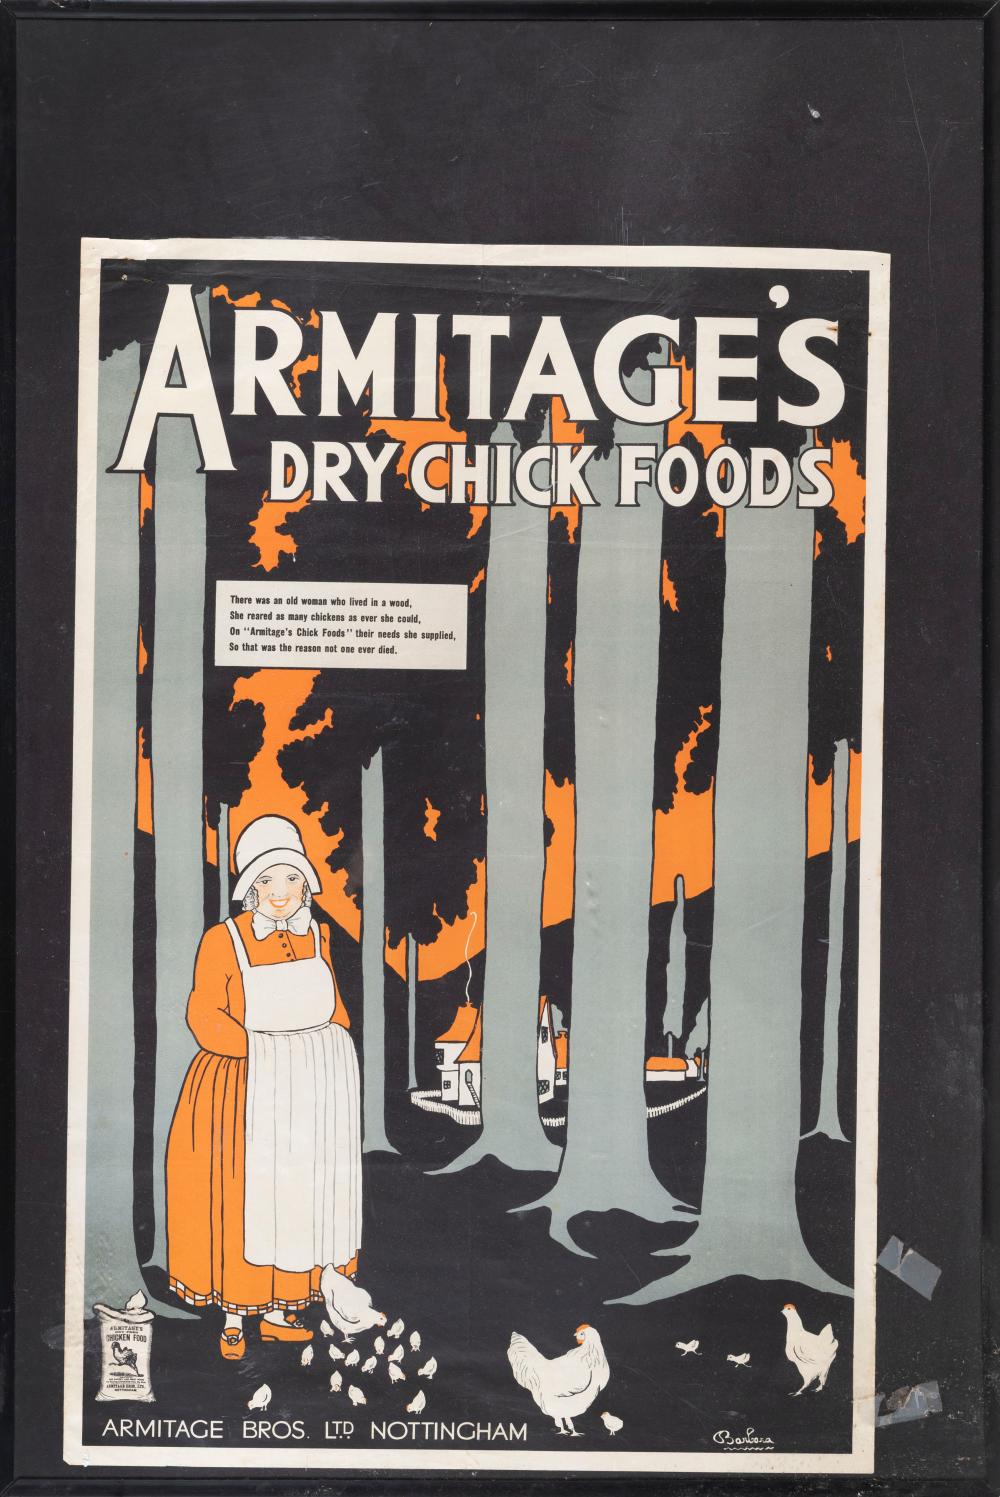 POSTER FOR ARMITAGES DRY CHICK